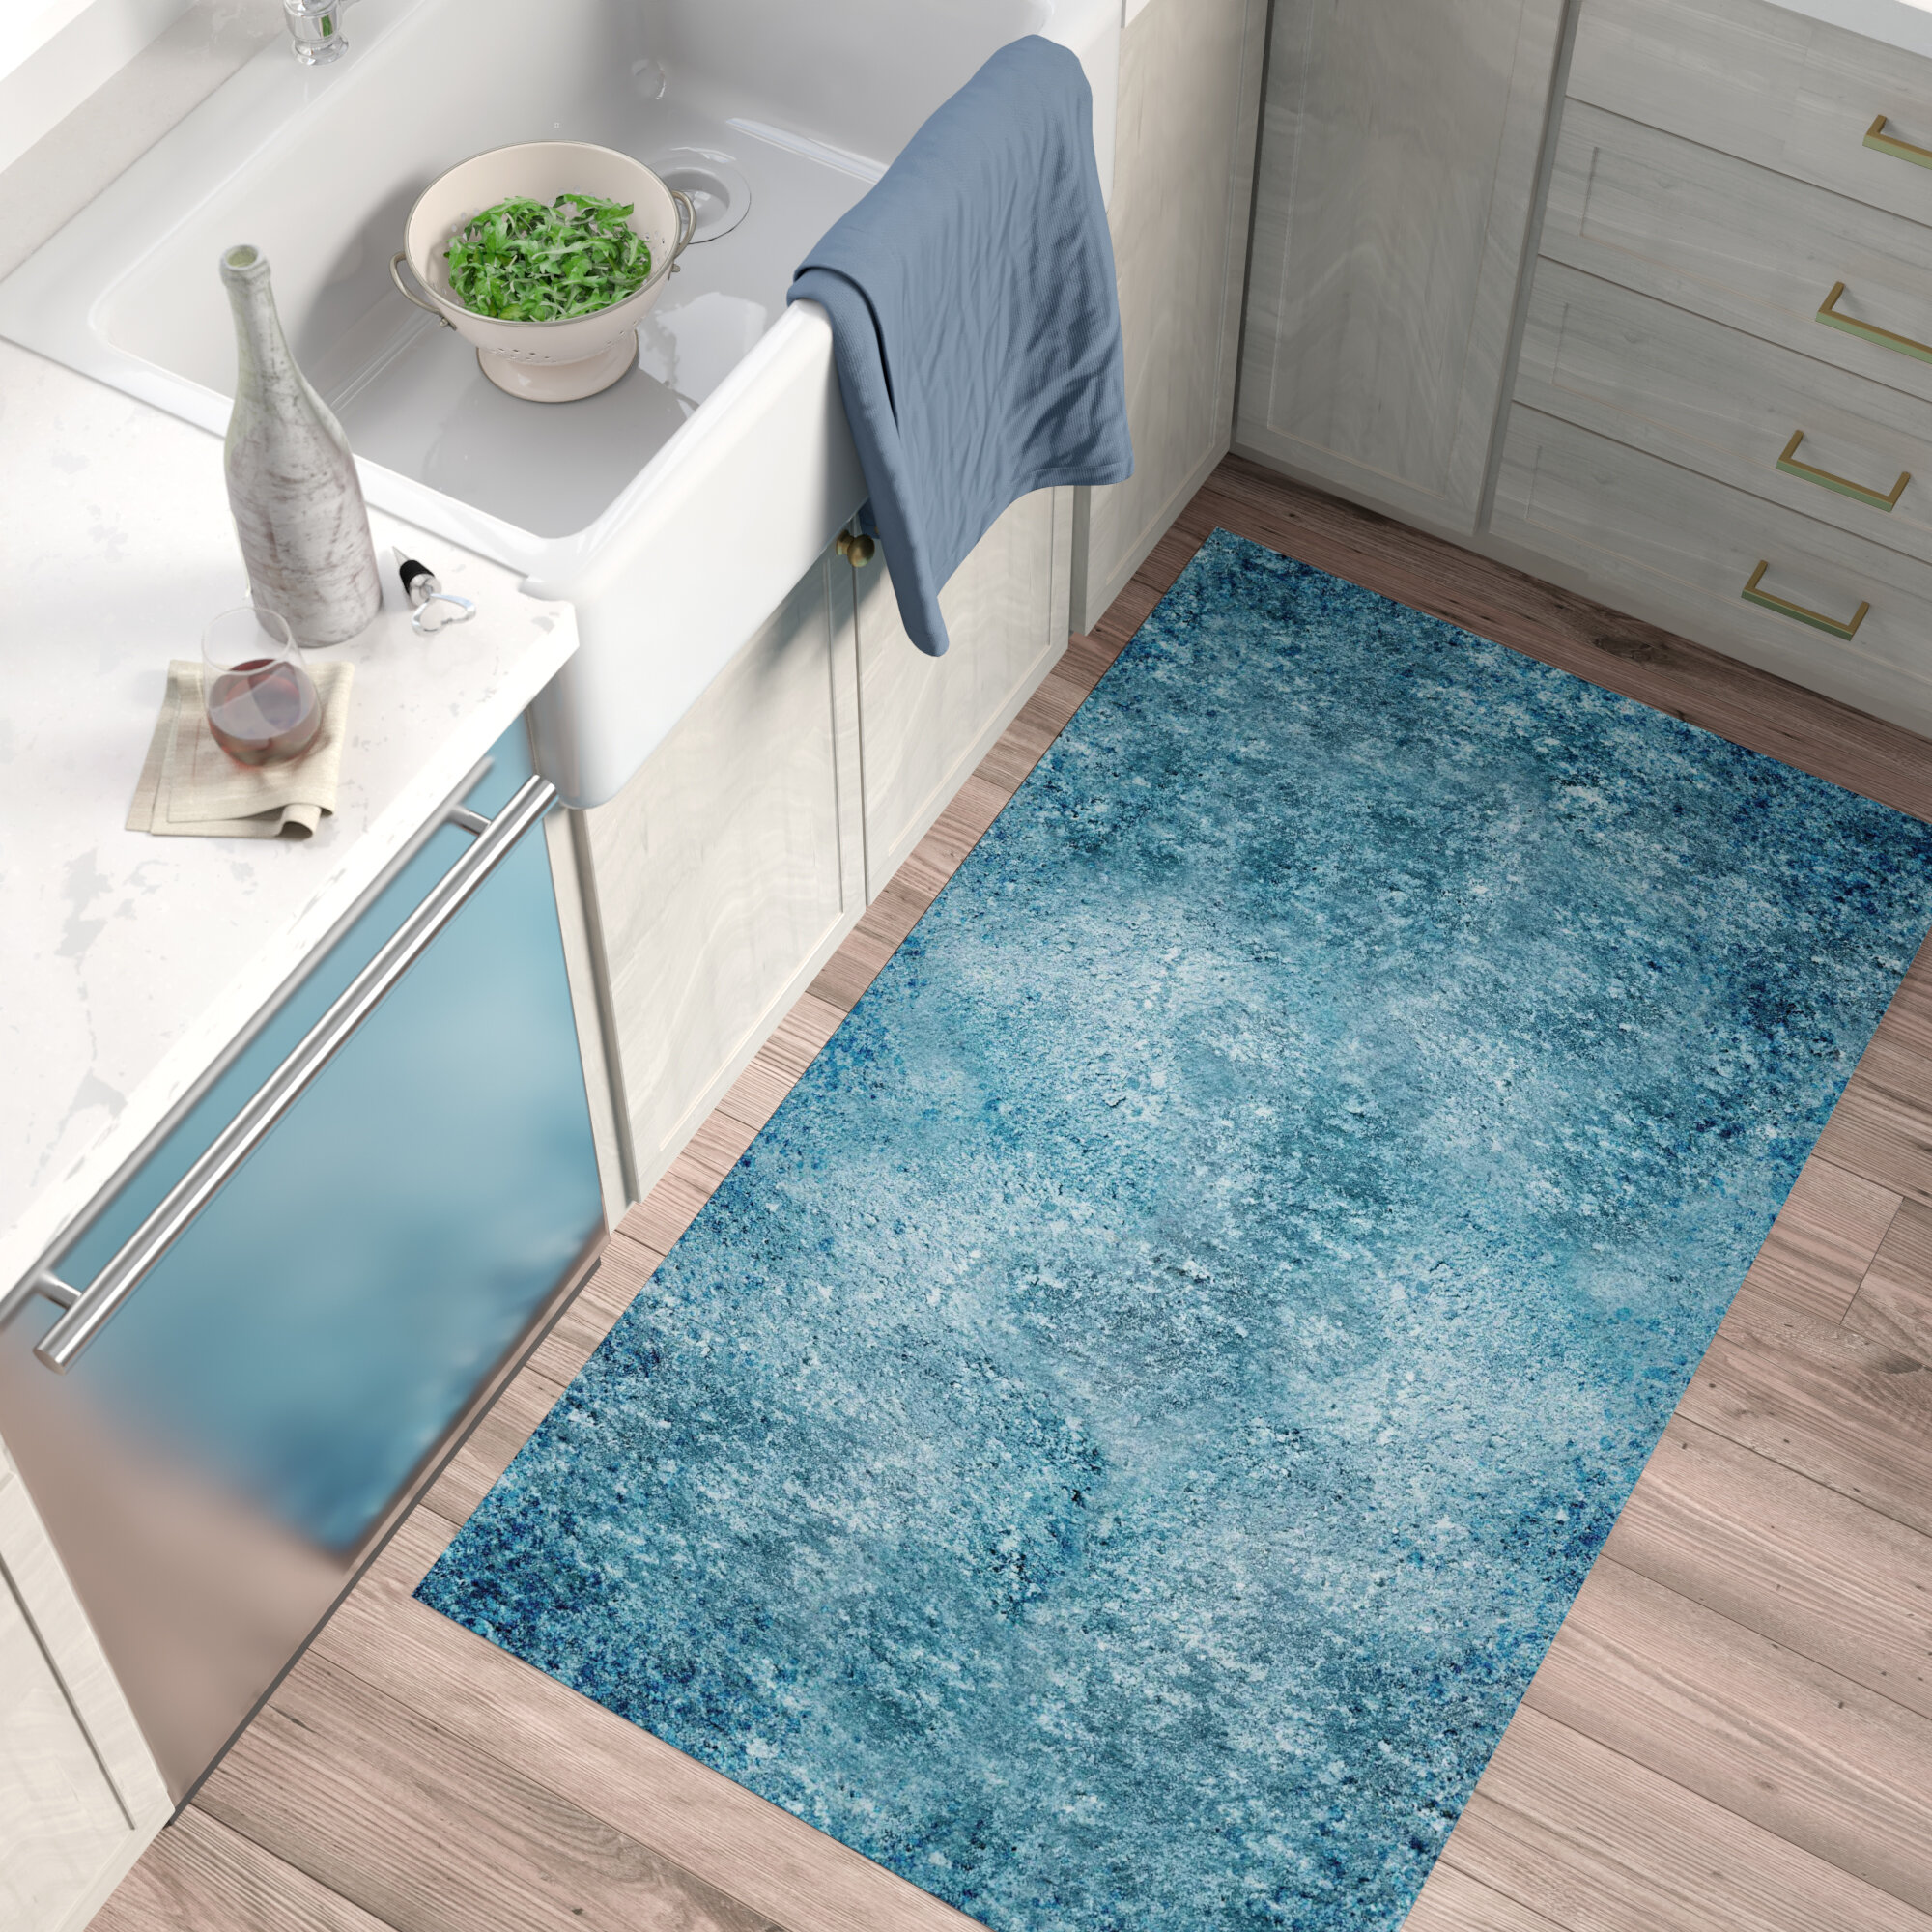 [BIG SALE] Our Best Kitchen Mats for Less You’ll Love In 2021 Wayfair